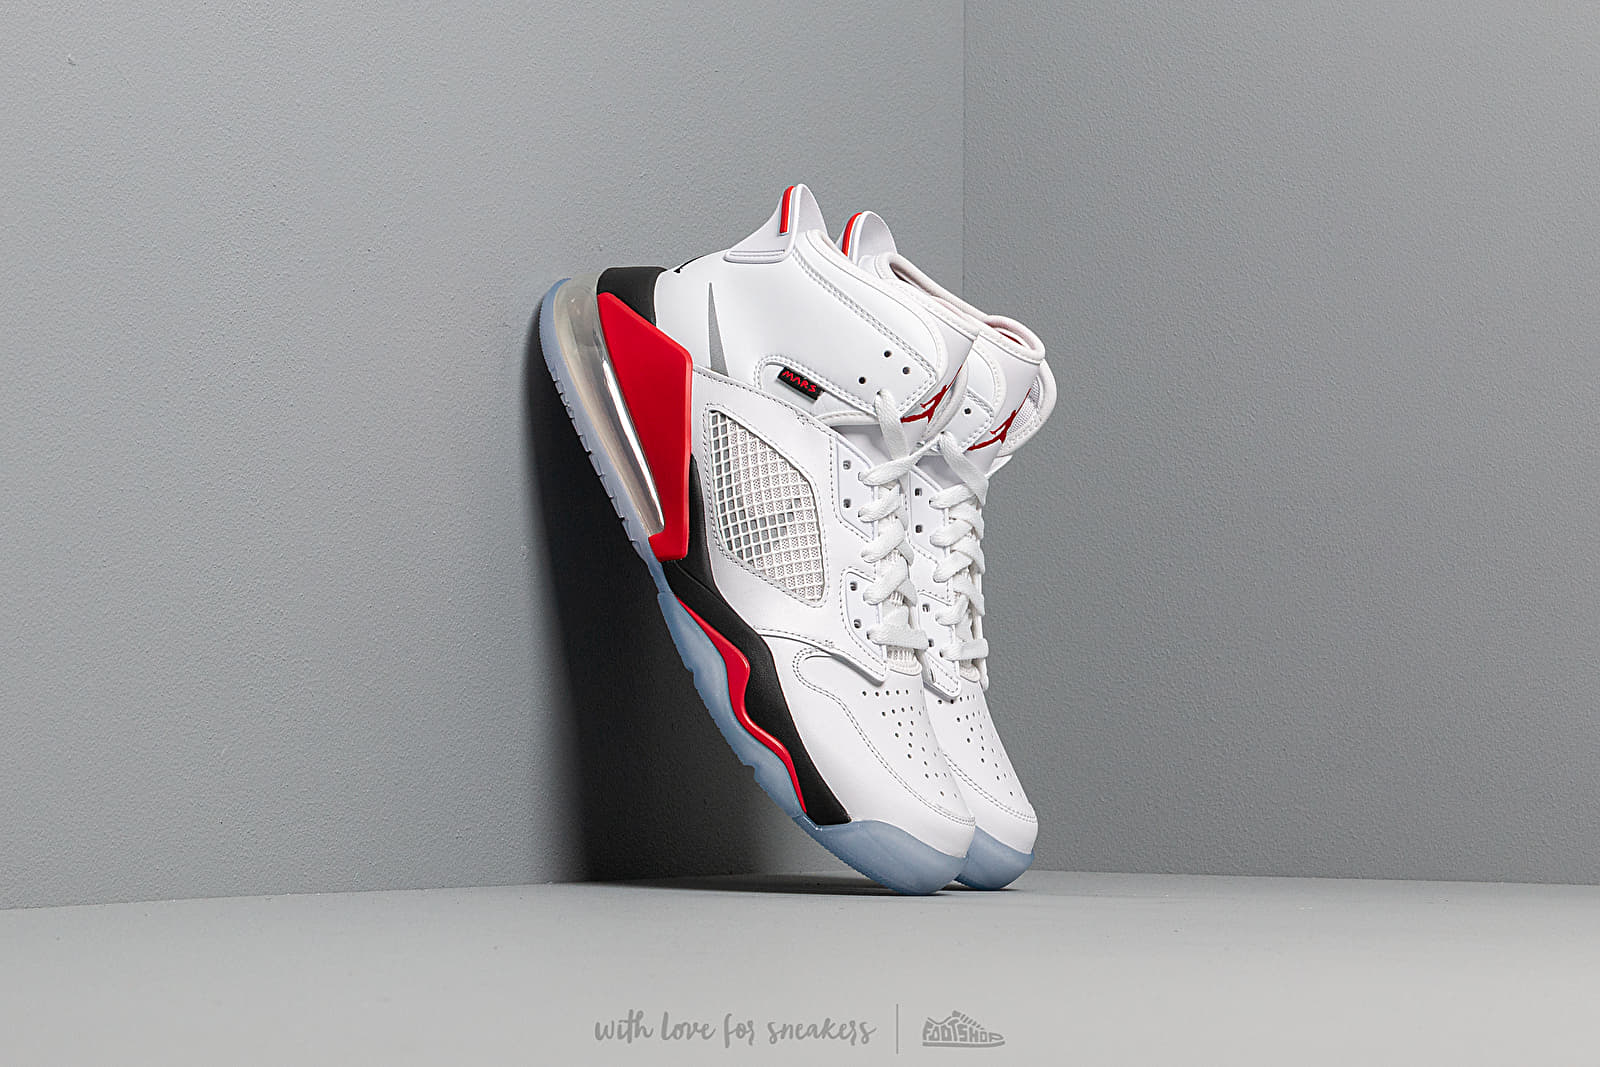 Chaussures et baskets homme Jordan Mars 270 White/ Reflect Silver-Fire Red-Black